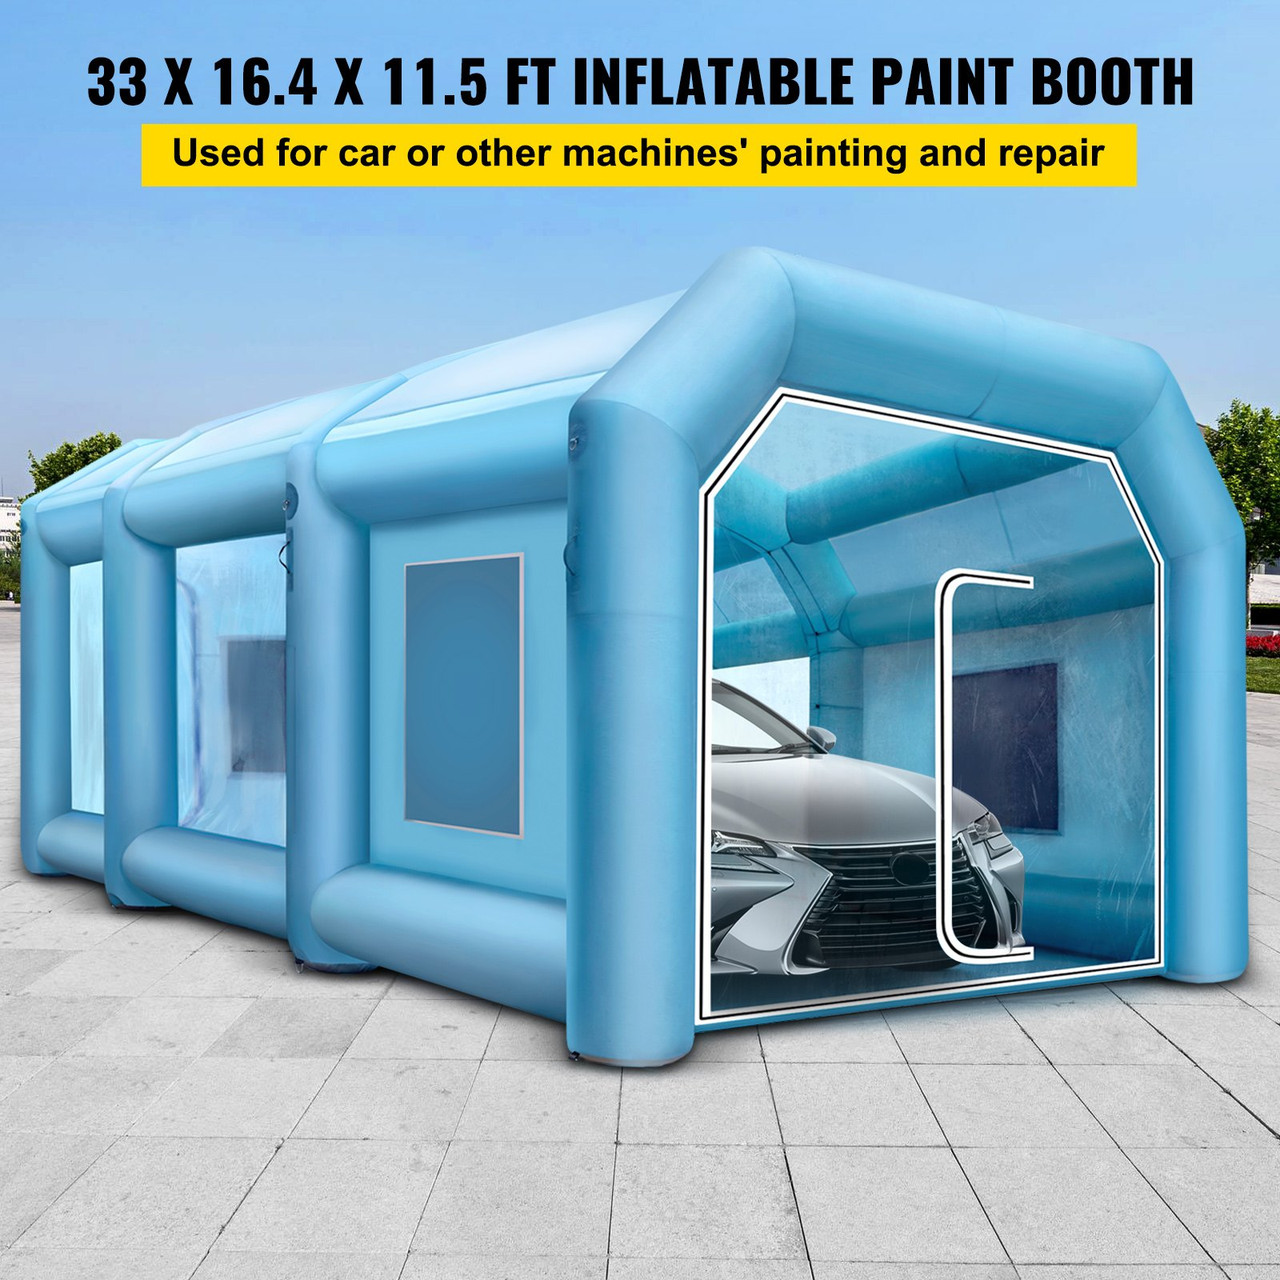 Inflatable Spray Booth Portable Car Paint Booth with Filter System